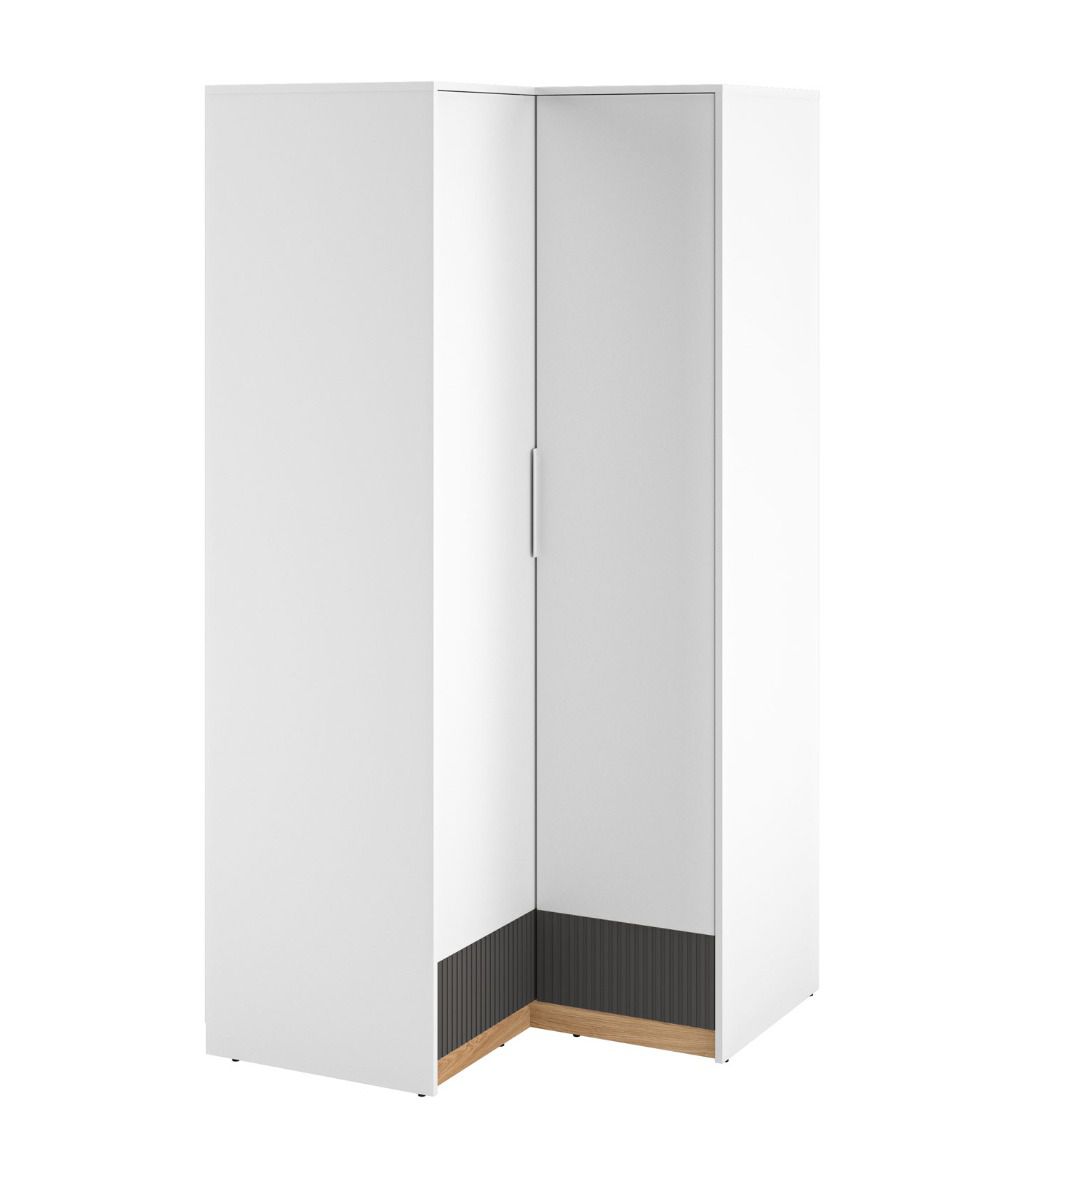 Hinge-door closet / corner closet with five compartments Mackinac 03, handles: Metal, color: white / oak / graphite matt, soft-close system, dimensions: 196 x 96 x 96 cm, with two doors and two clothes rails